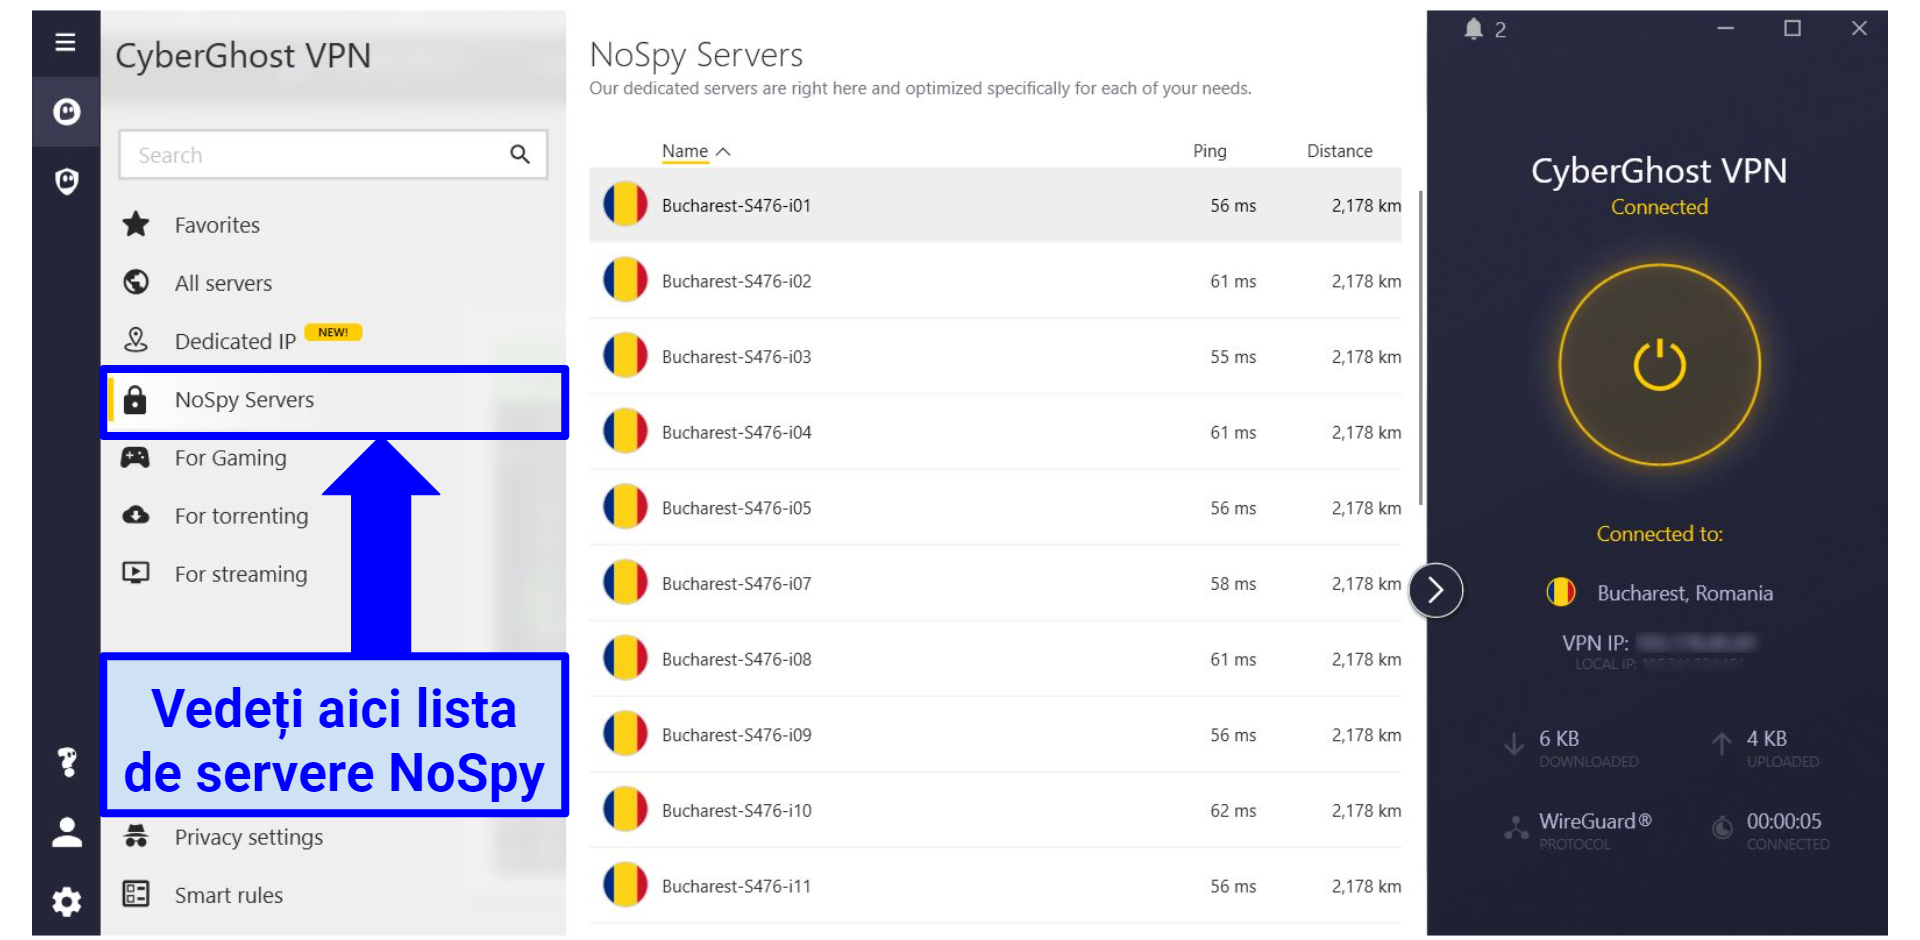 graphic showing NoSpy servers